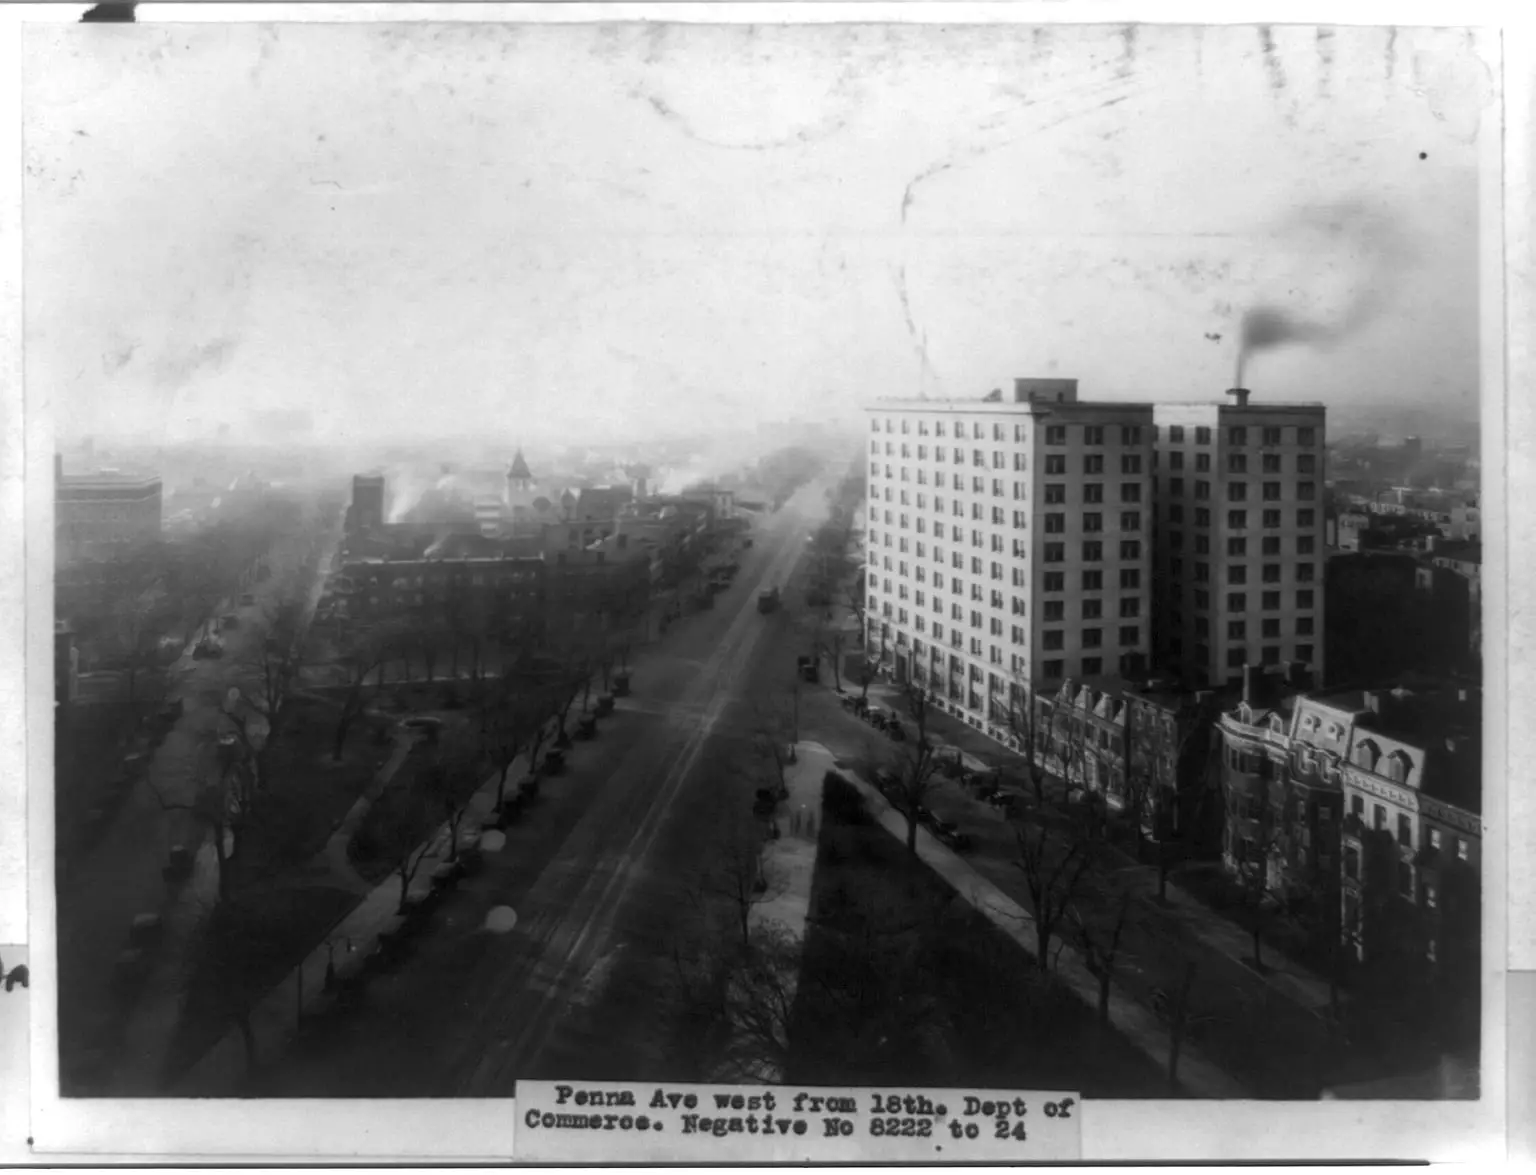 Bird's-eye view of Pennsylvania Avenue west from 18th Street, Washington, D.C., showing the Department of Commerce